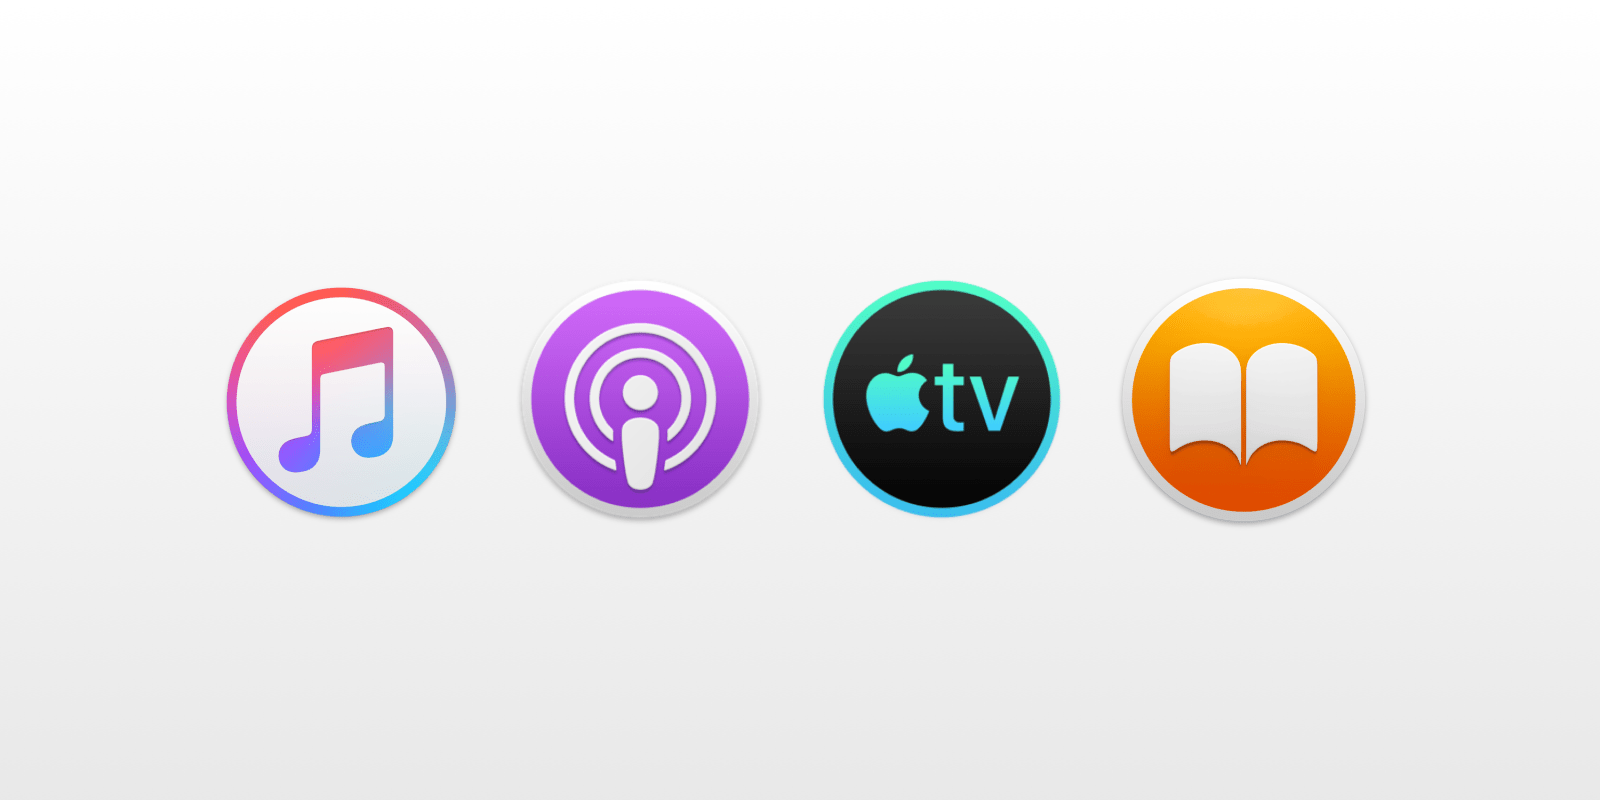 Techmeme Sources The Next Major Version Of Macos Will Include Standalone Music Podcasts And Tv Apps Alongside A Redesigned Books App Guilherme Rambo 9to5mac